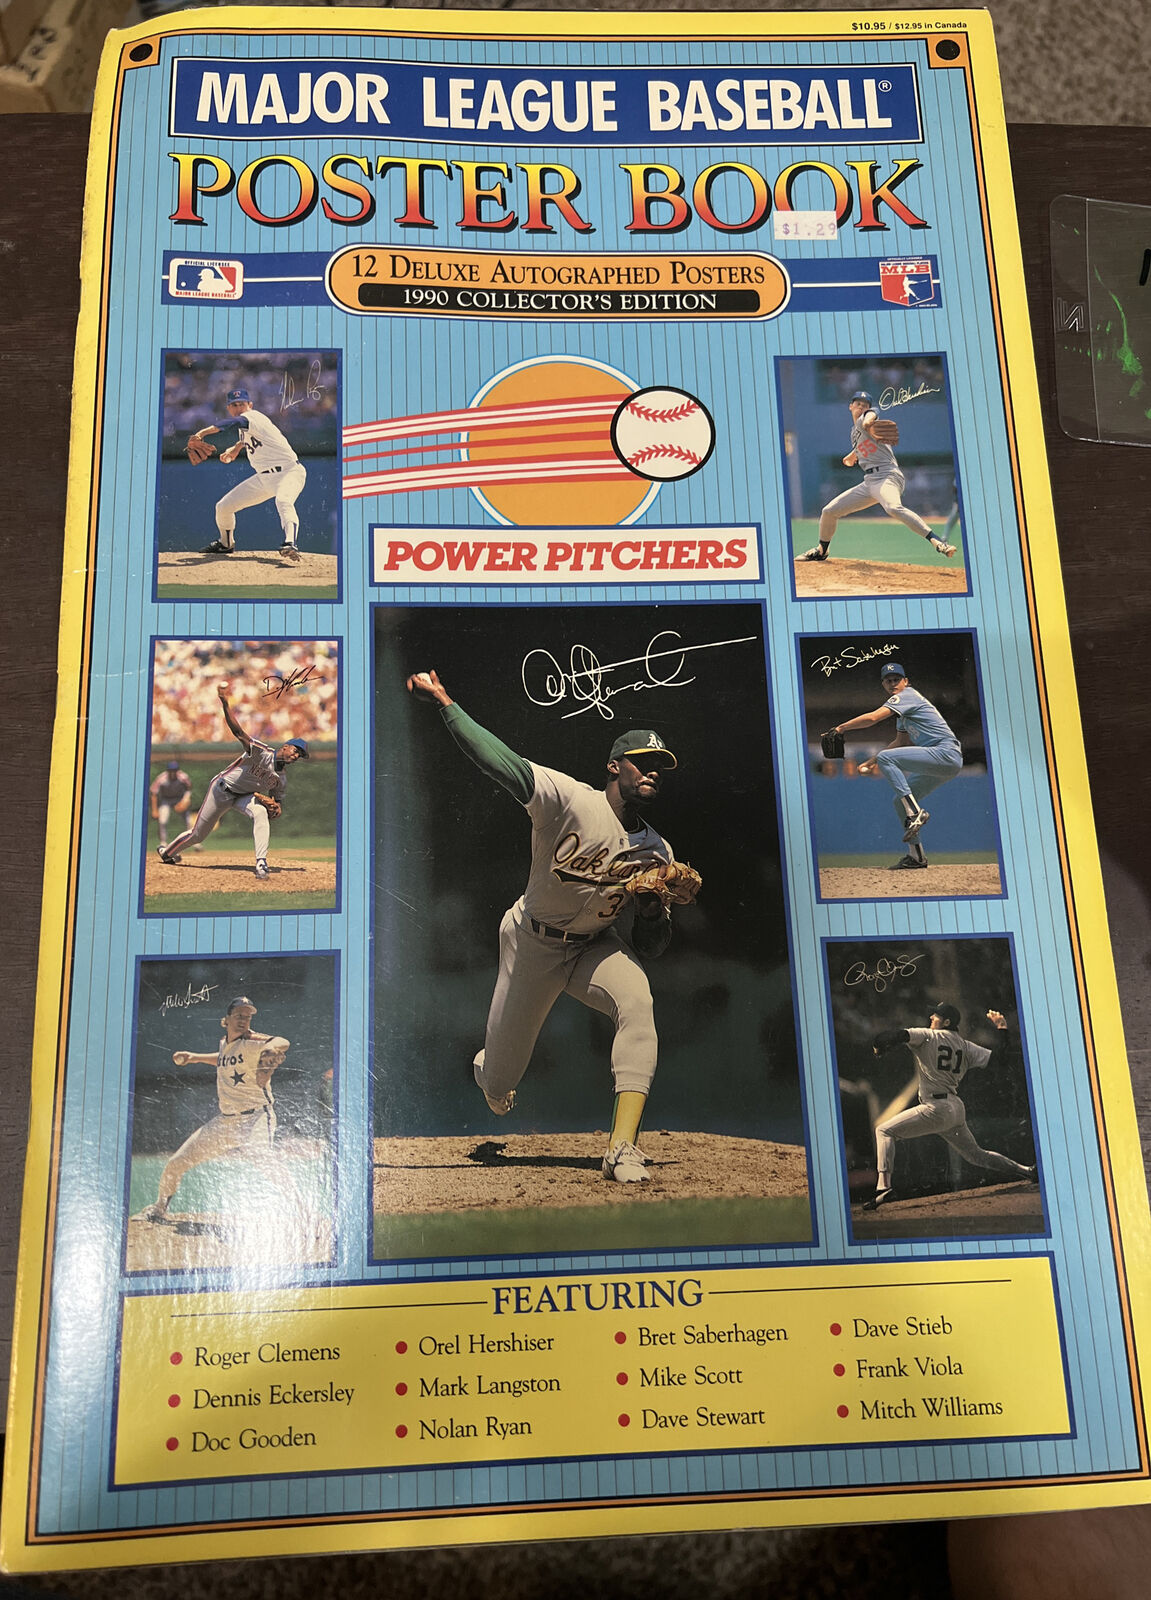 1990 collector’s edition Poster Book Power Pitchers